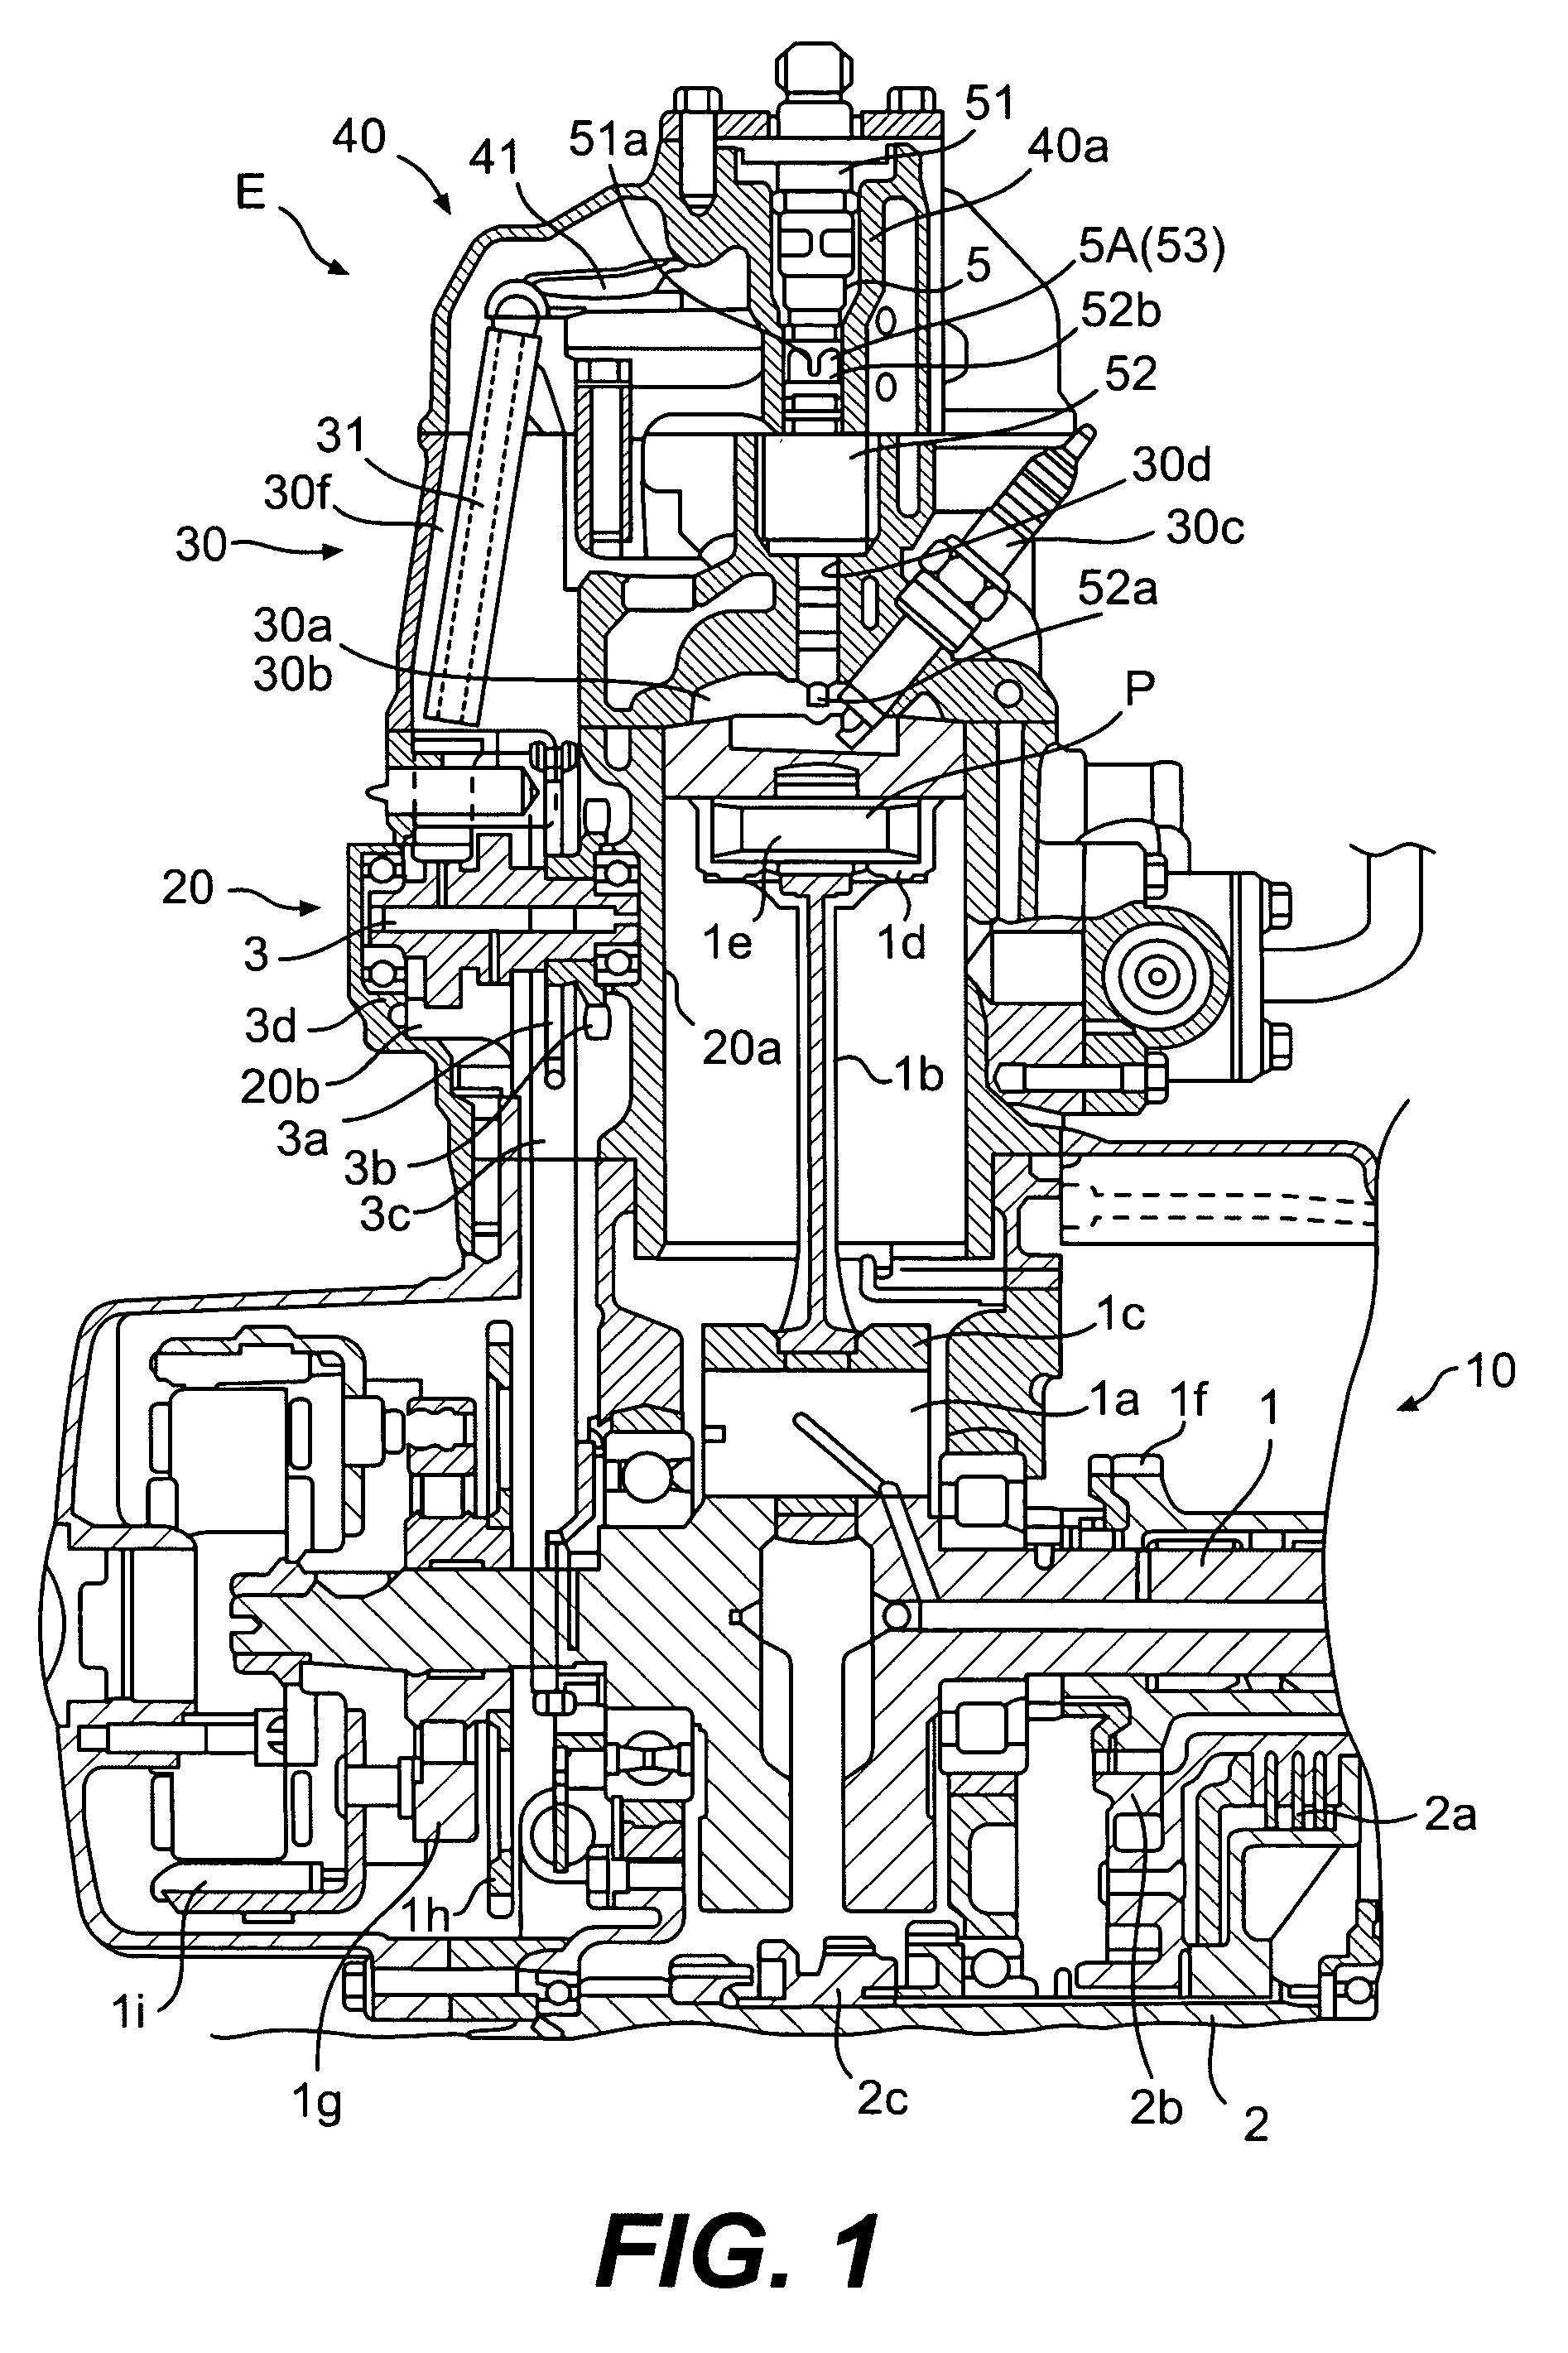 Internal combustion engine with air-fuel mixture injection